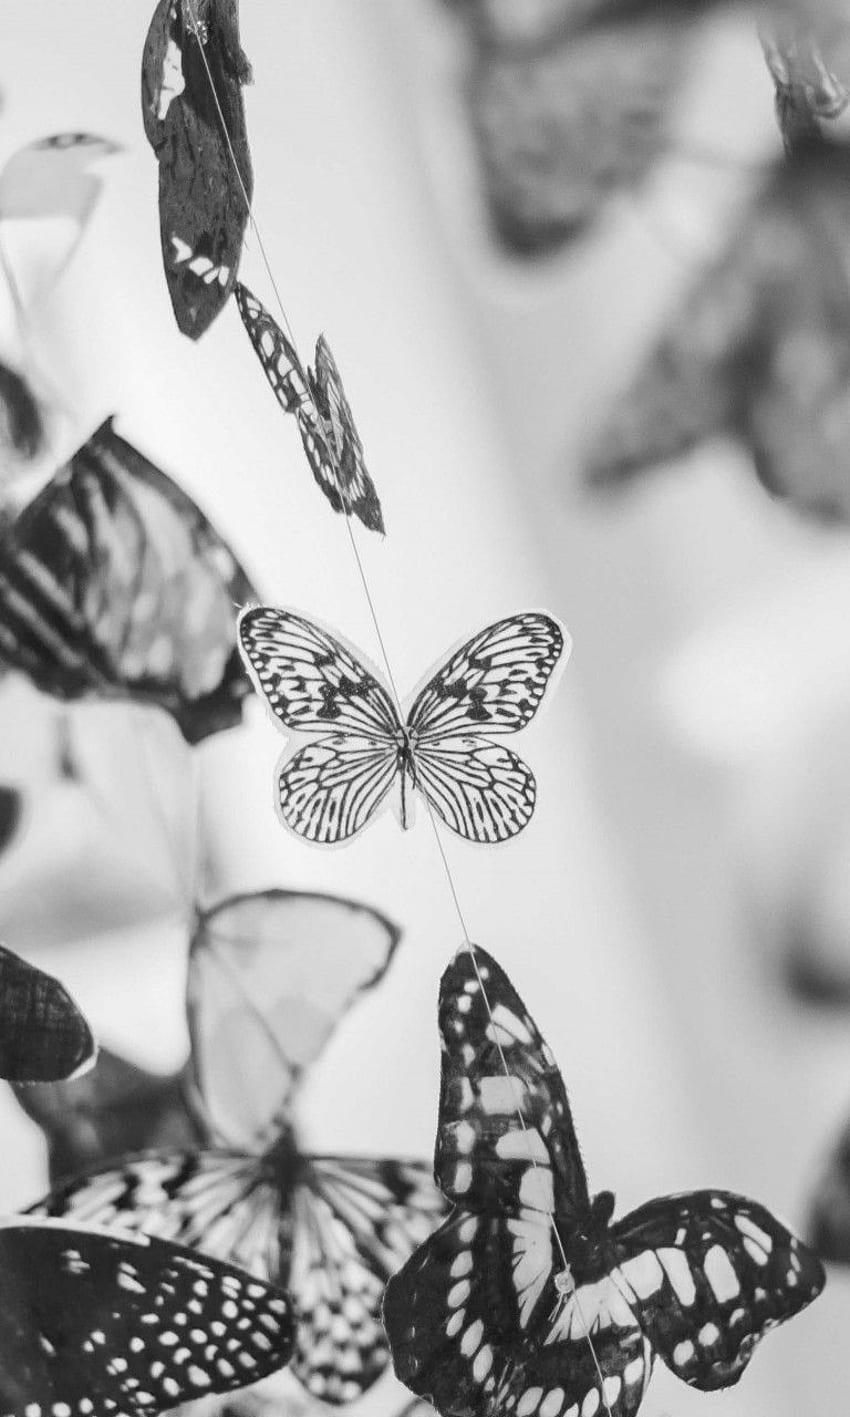 959801 White Butterfly Images Stock Photos  Vectors  Shutterstock